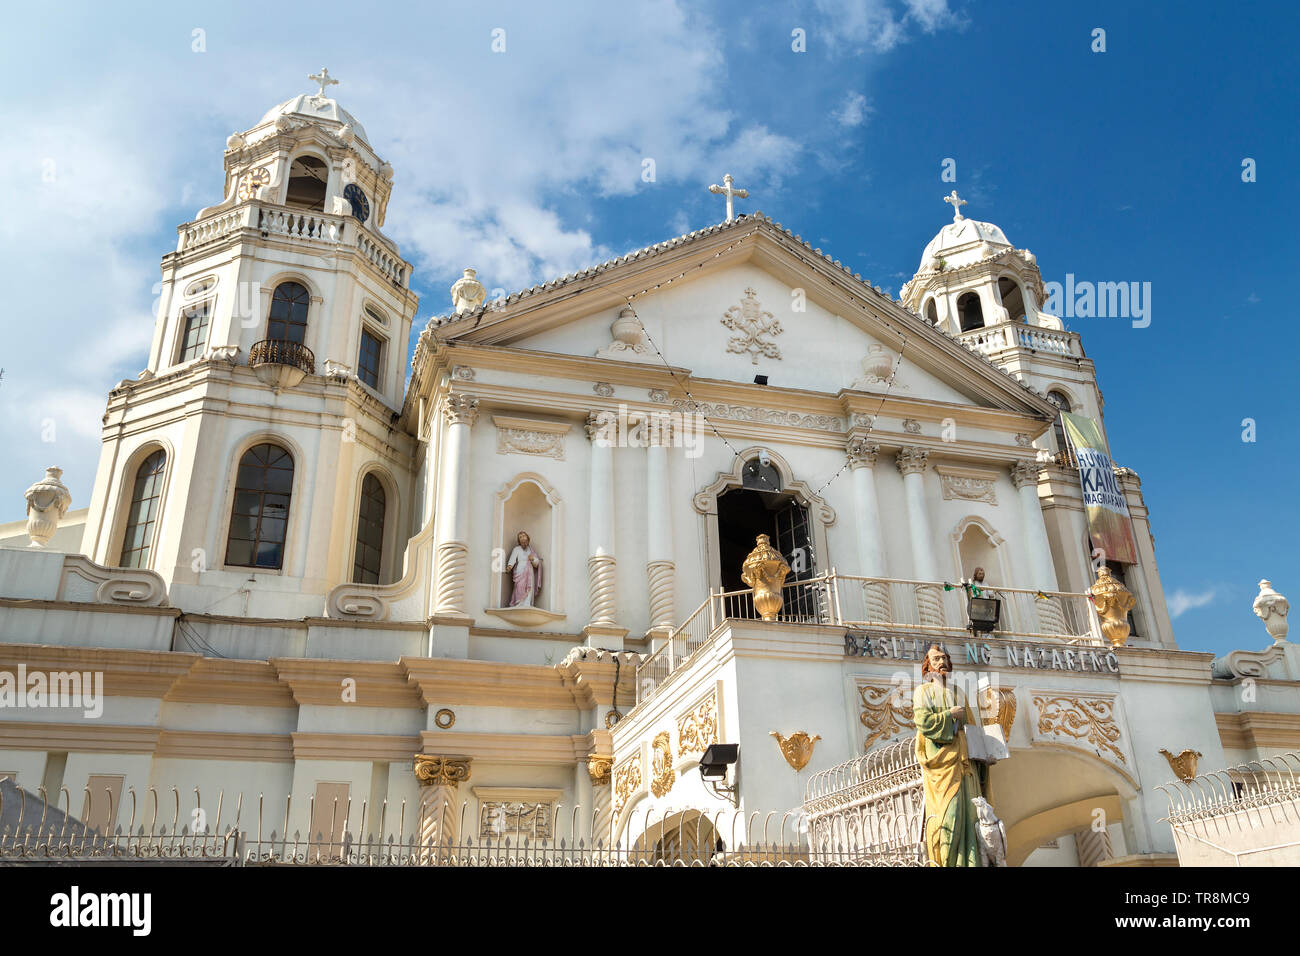 Quiapo, Philippines - July 16, 2016: Facade of catholic cathedral or church Stock Photo